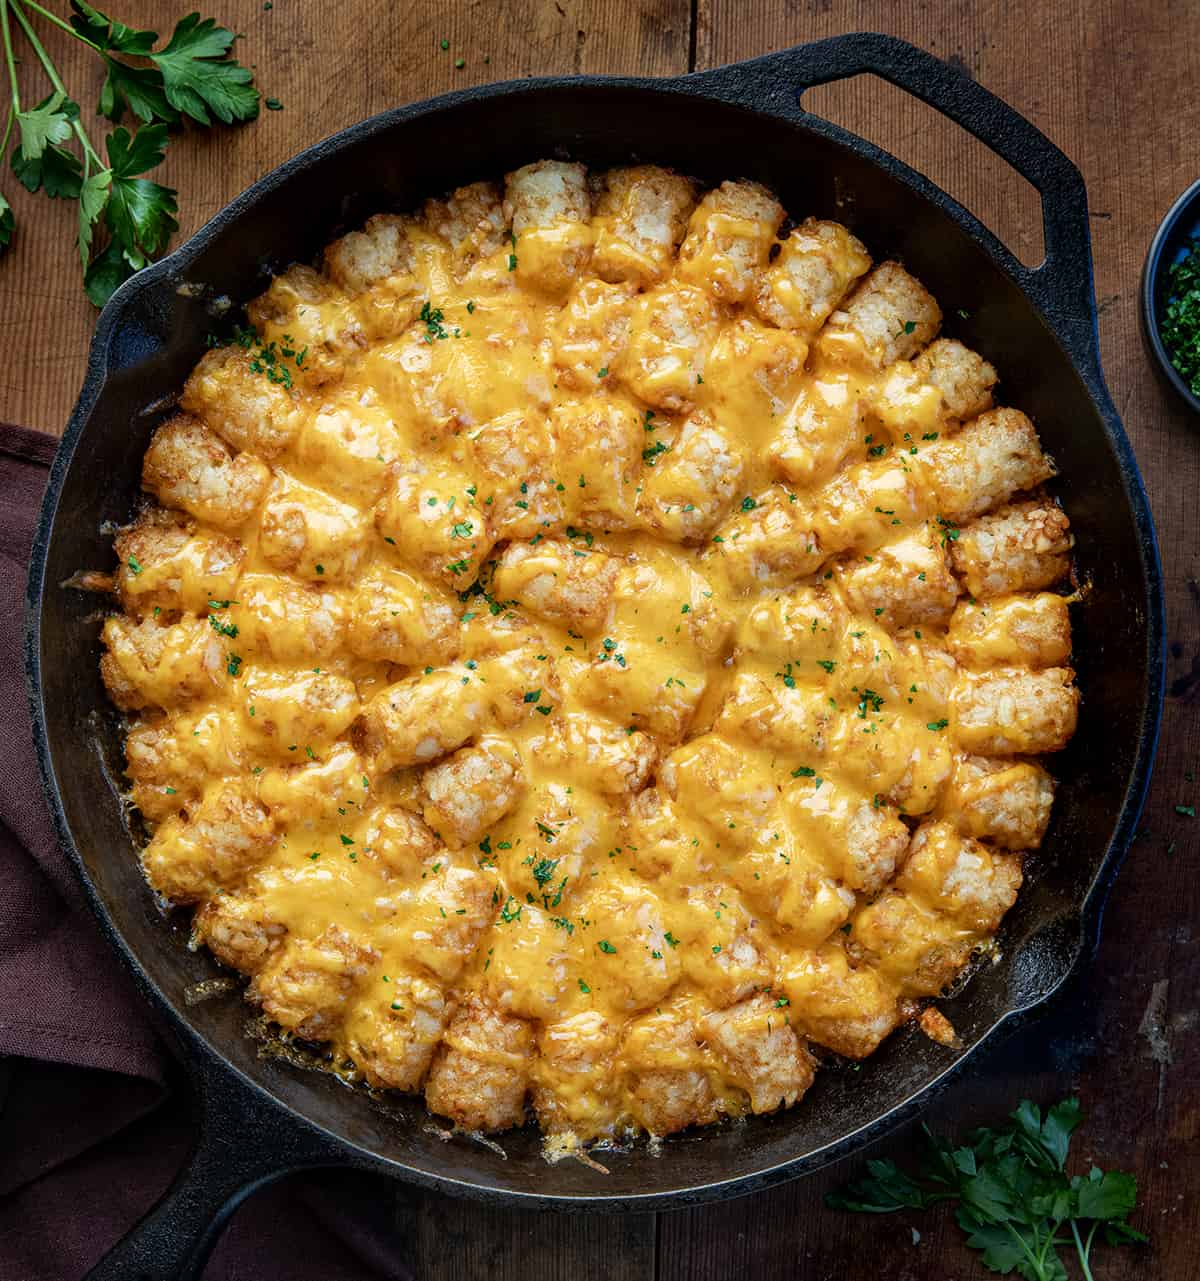 Sloppy Joe Tater Tot Casserole in a skillet on a wooden table from overhead. 